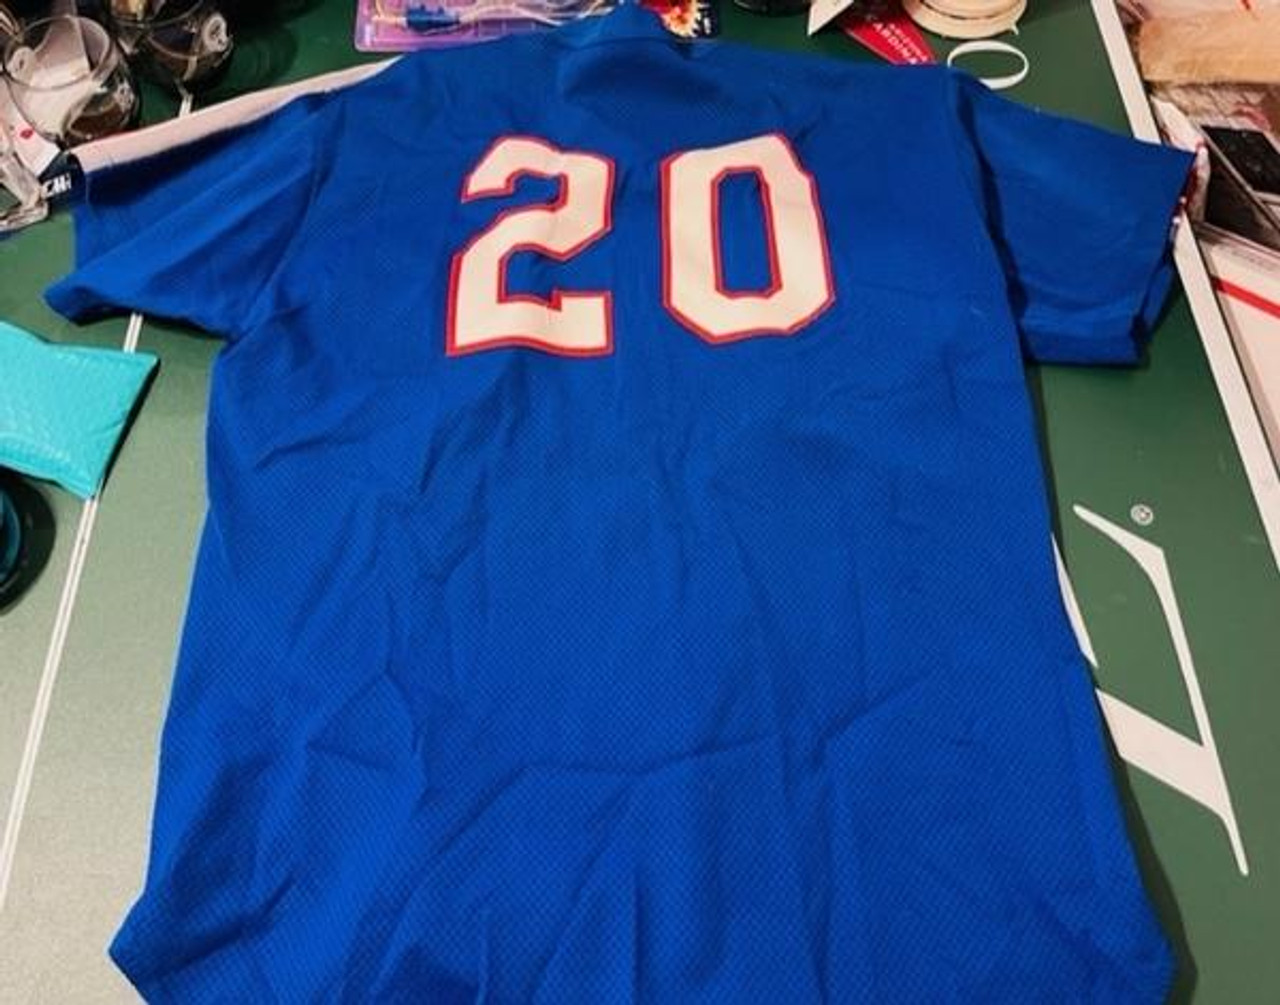 Texas Rangers Game Used MLB Jerseys for sale